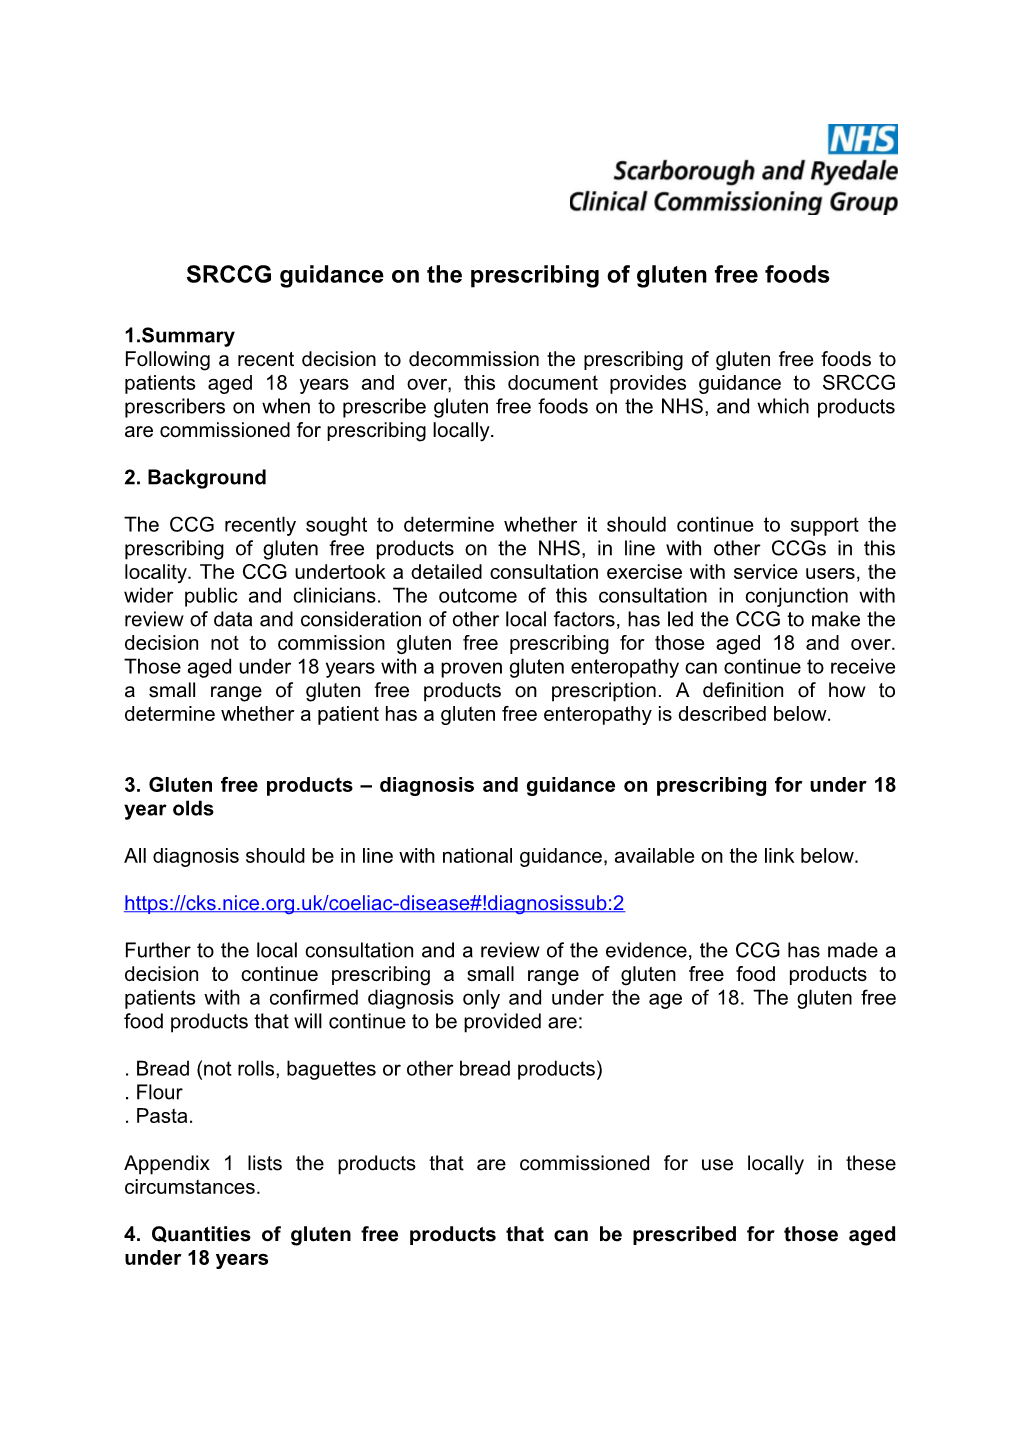 SRCCG Guidance on the Prescribing of Gluten Free Foods